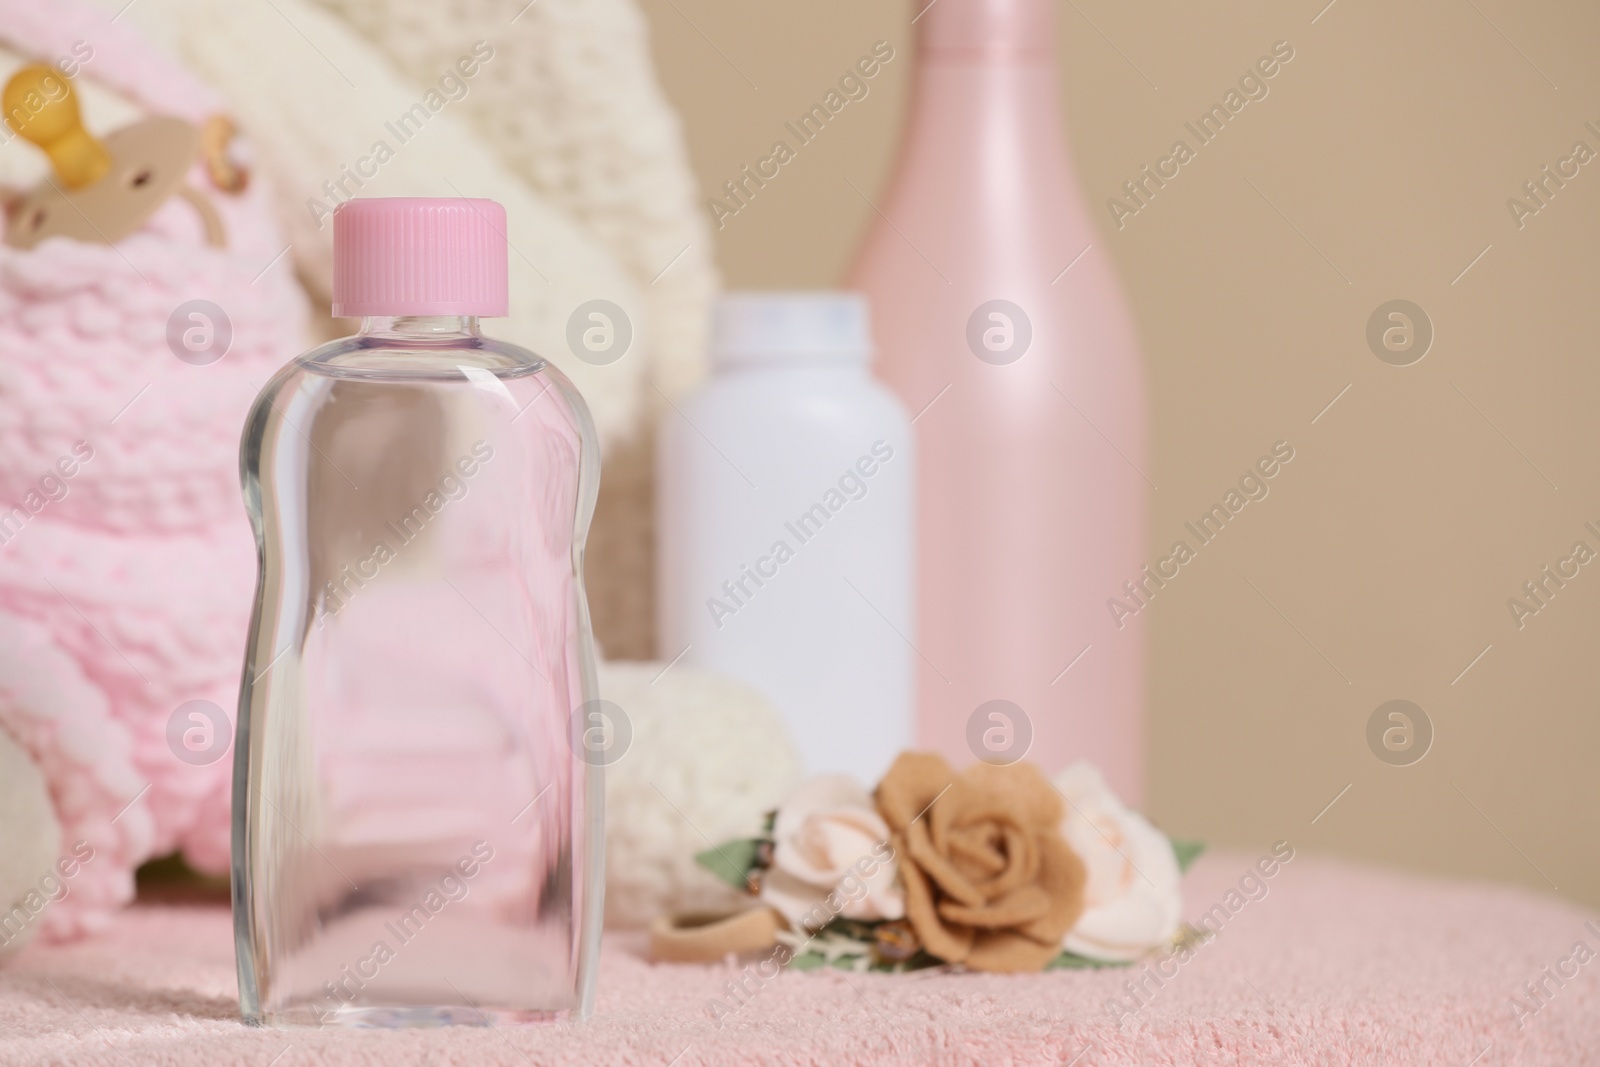 Photo of Baby cosmetic products and accessories on pink towel against beige background. Space for text